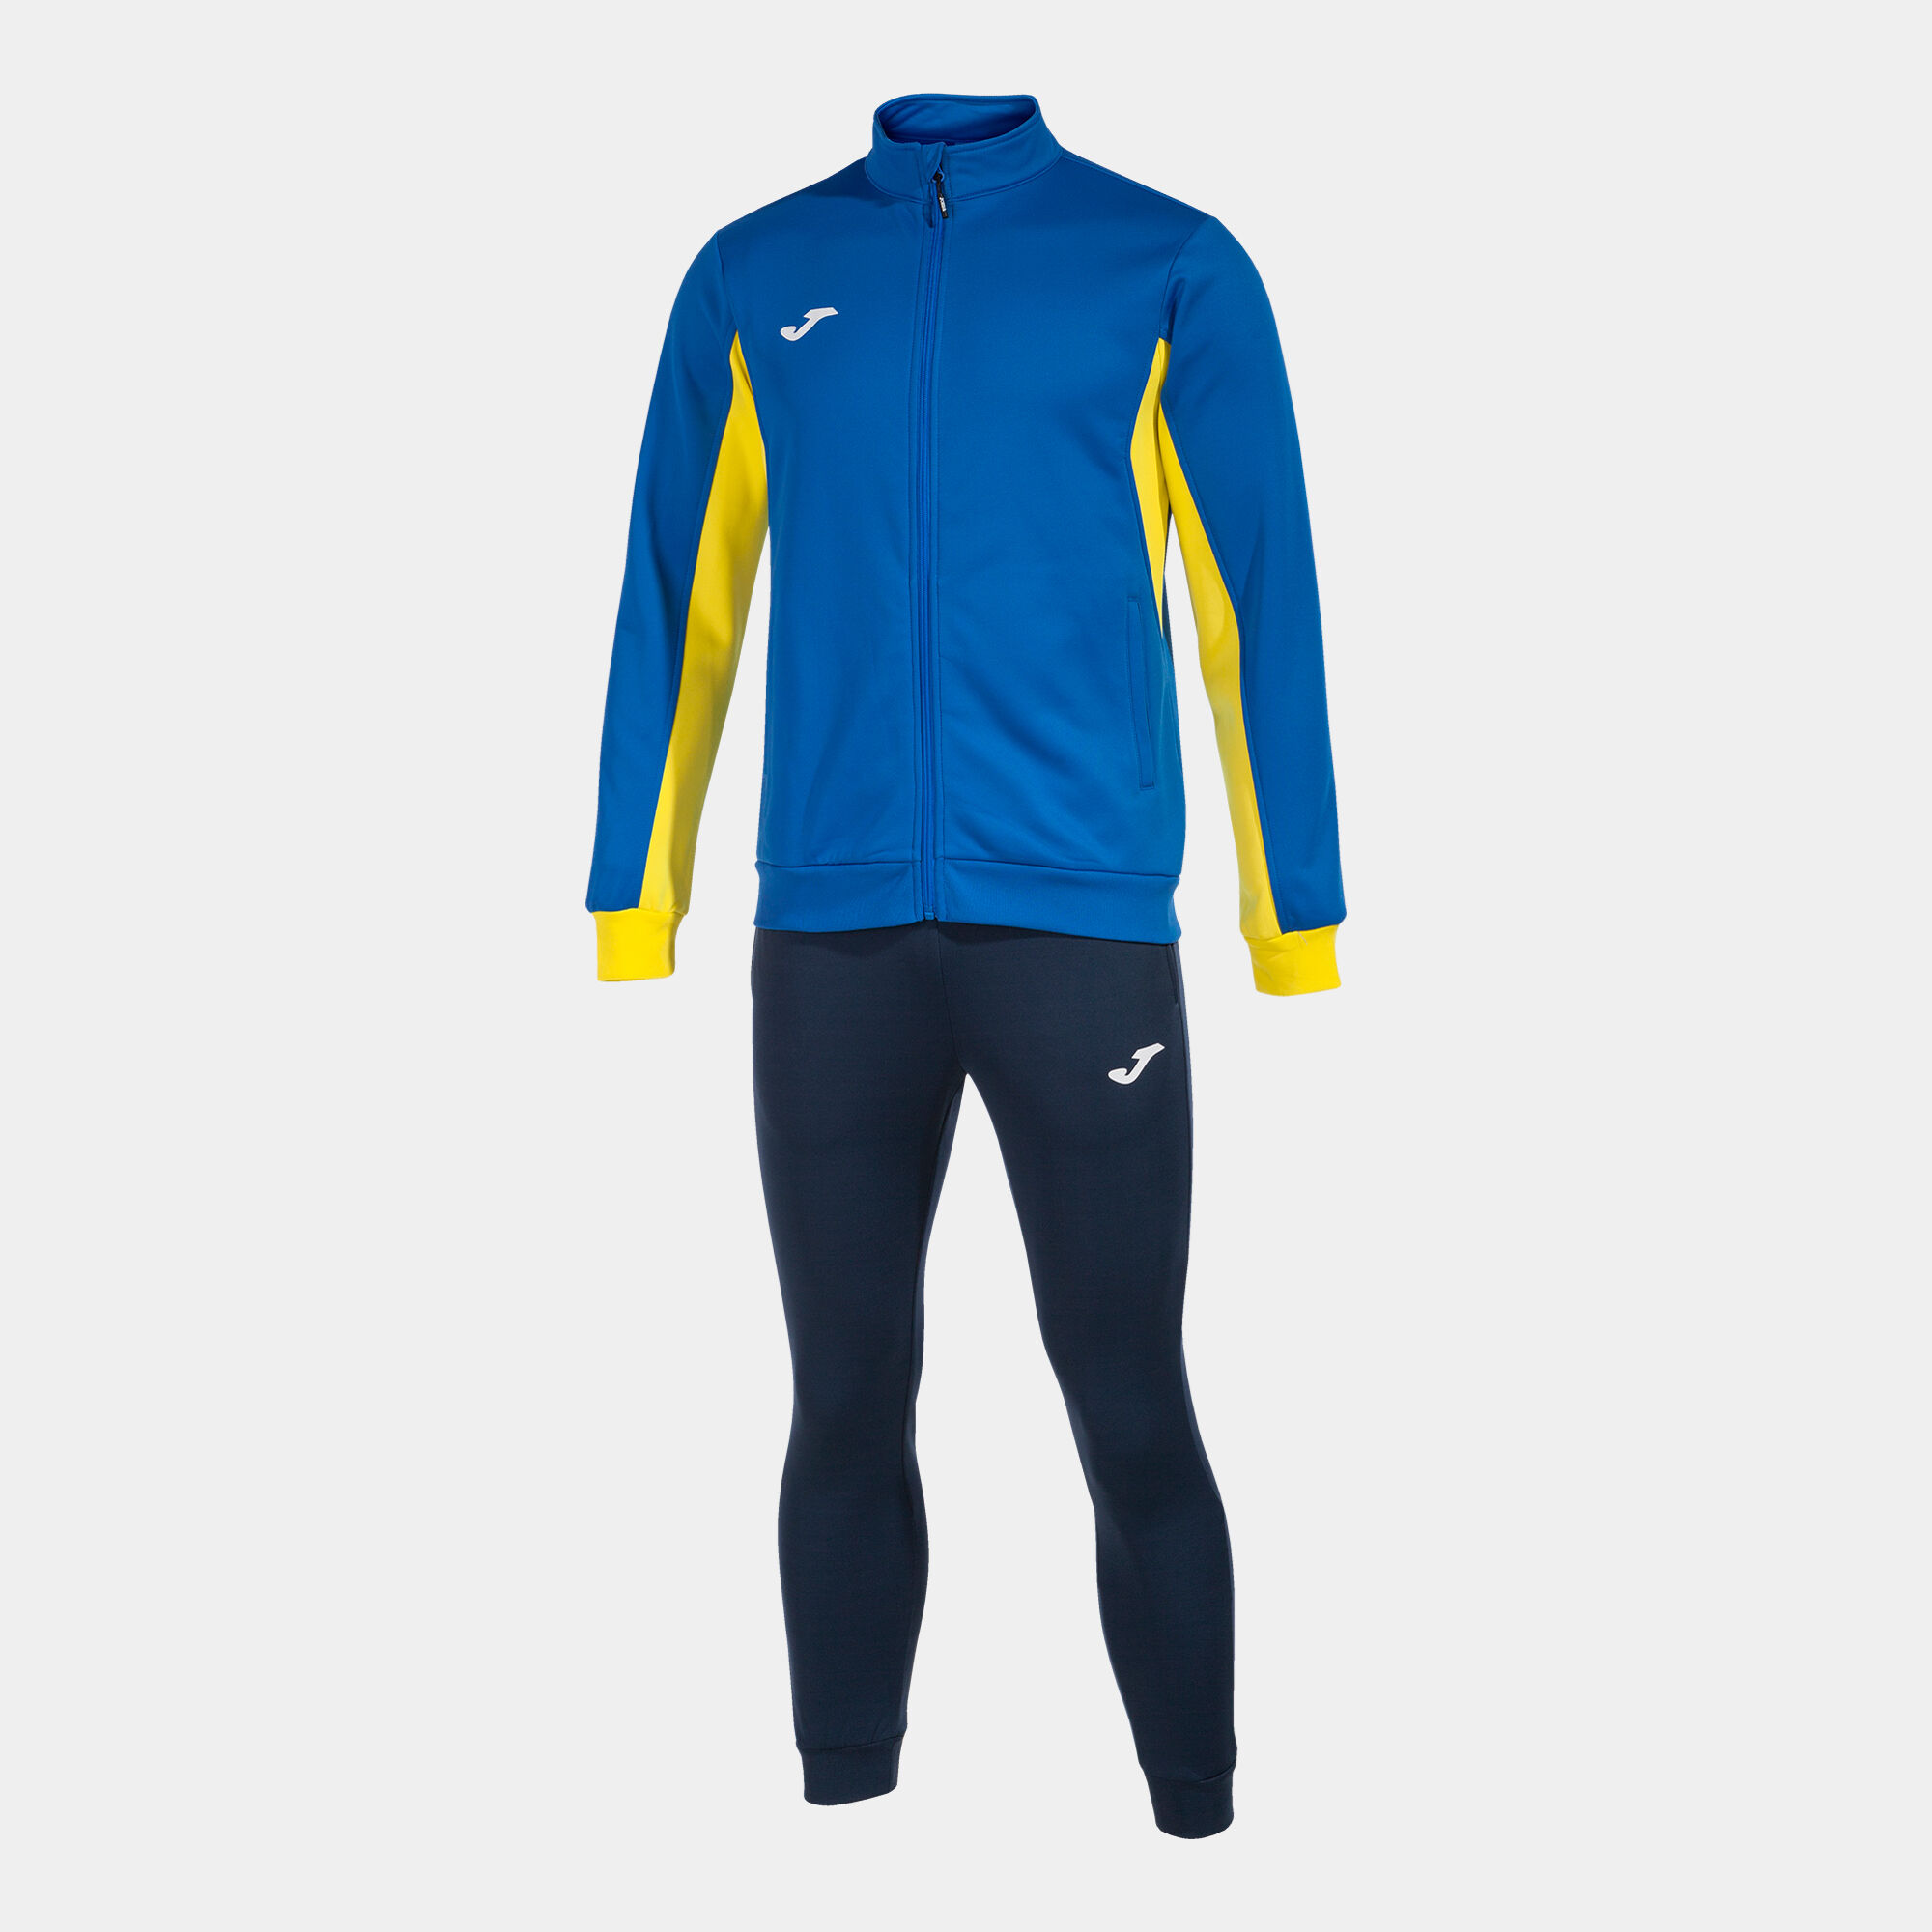 Tracksuit man Derby royal blue yellow